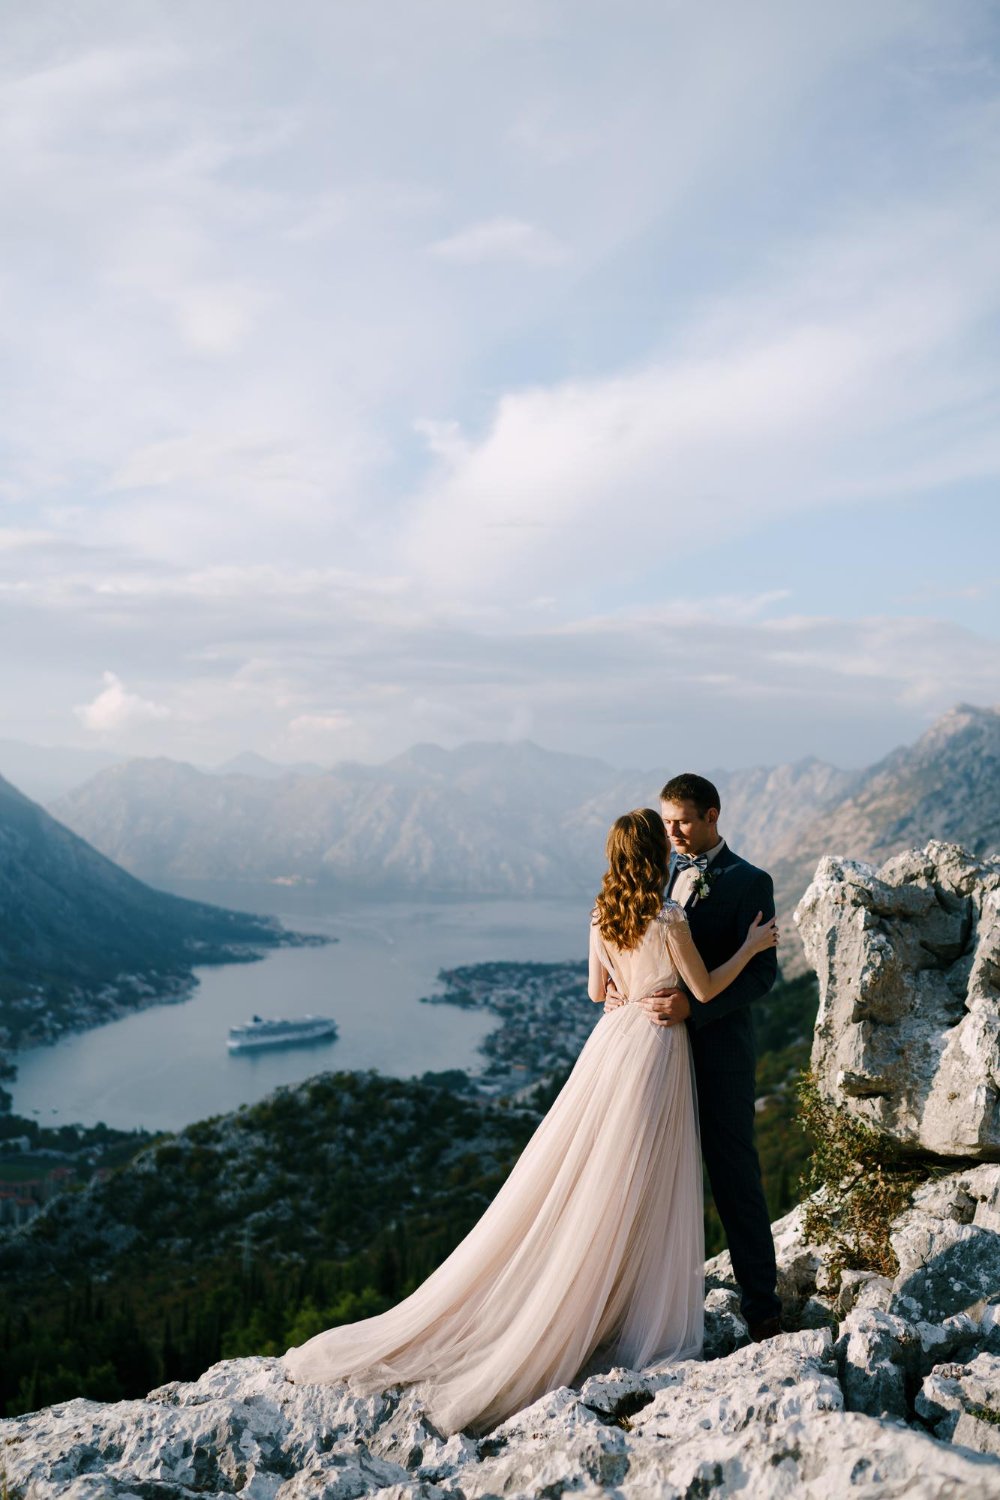 Groom hugs bride by the waist on a rocky mountain overlooking the bay